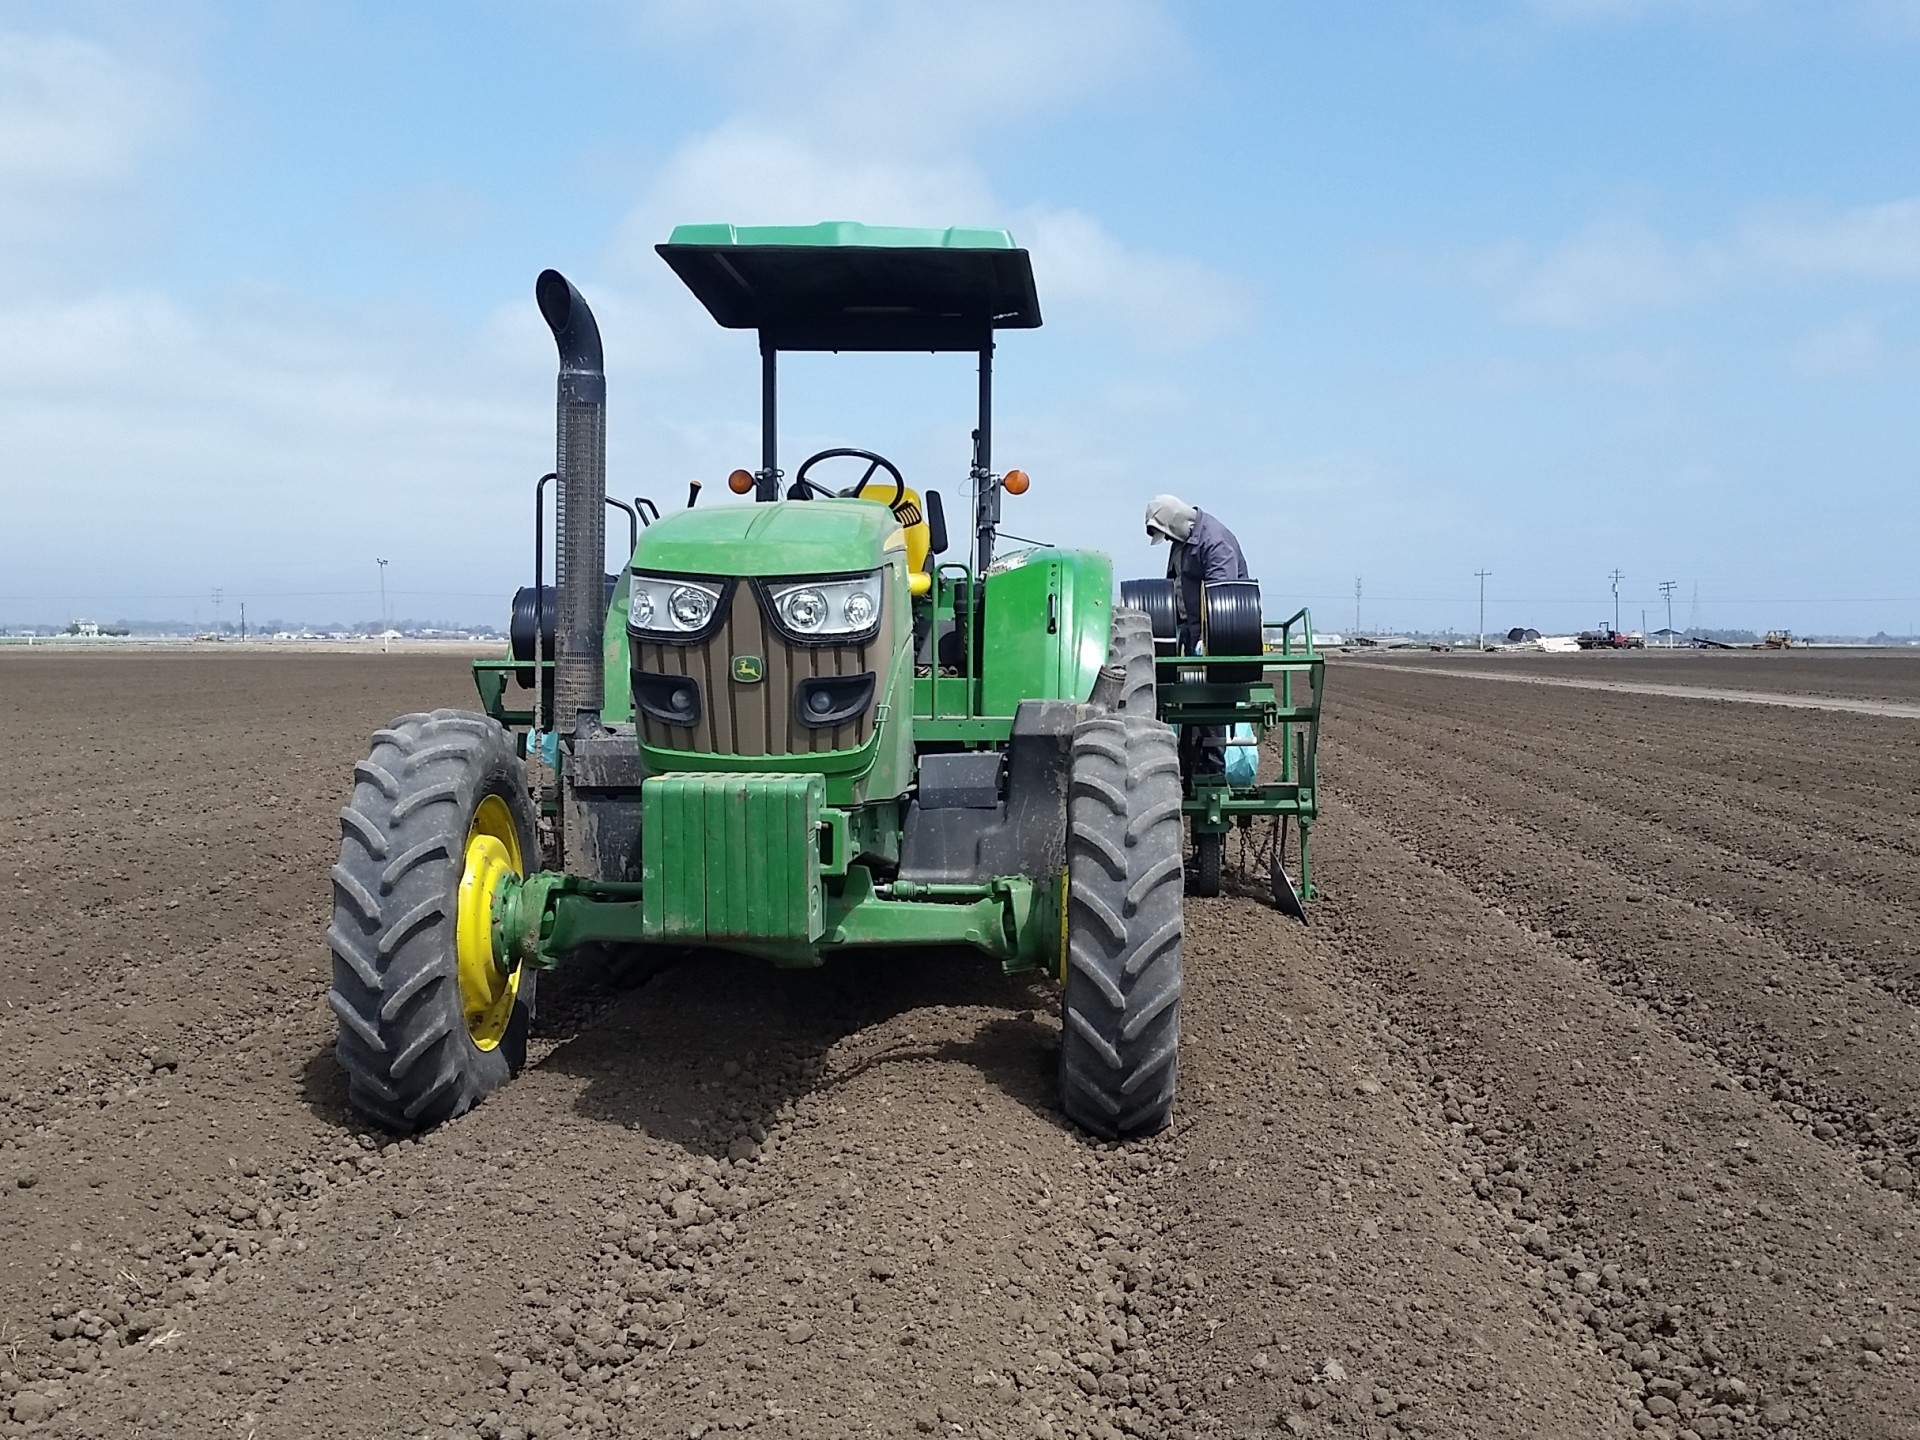 Tanimura & Antle workers use tractors to install drip tape into fields that will be used to grow lettuce and other crops in California's Salinas Valley.